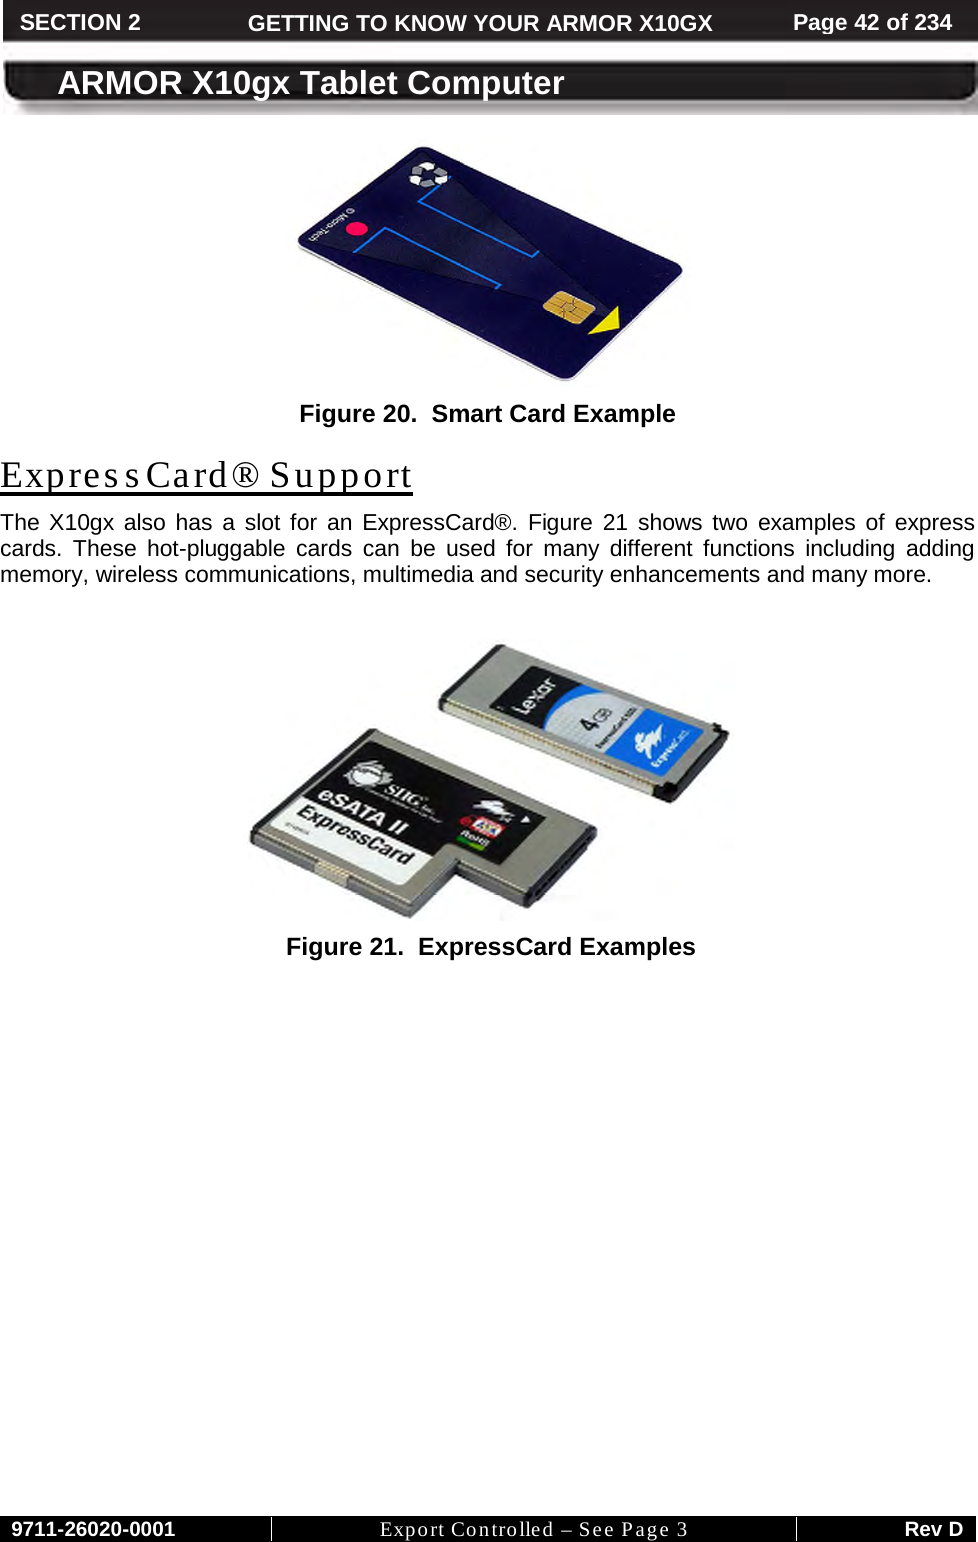     9711-26020-0001 Export Controlled – See Page 3 Rev D SECTION 2 GETTING TO KNOW YOUR ARMOR X10GX Page 42 of 234  ARMOR X10gx Tablet Computer  Figure 20.  Smart Card Example The X10gx also has a slot for an ExpressCard®. ExpressCard® Support Figure 21 shows two examples of express cards. These hot-pluggable cards can be used for many different functions including adding memory, wireless communications, multimedia and security enhancements and many more.    Figure 21.  ExpressCard Examples   